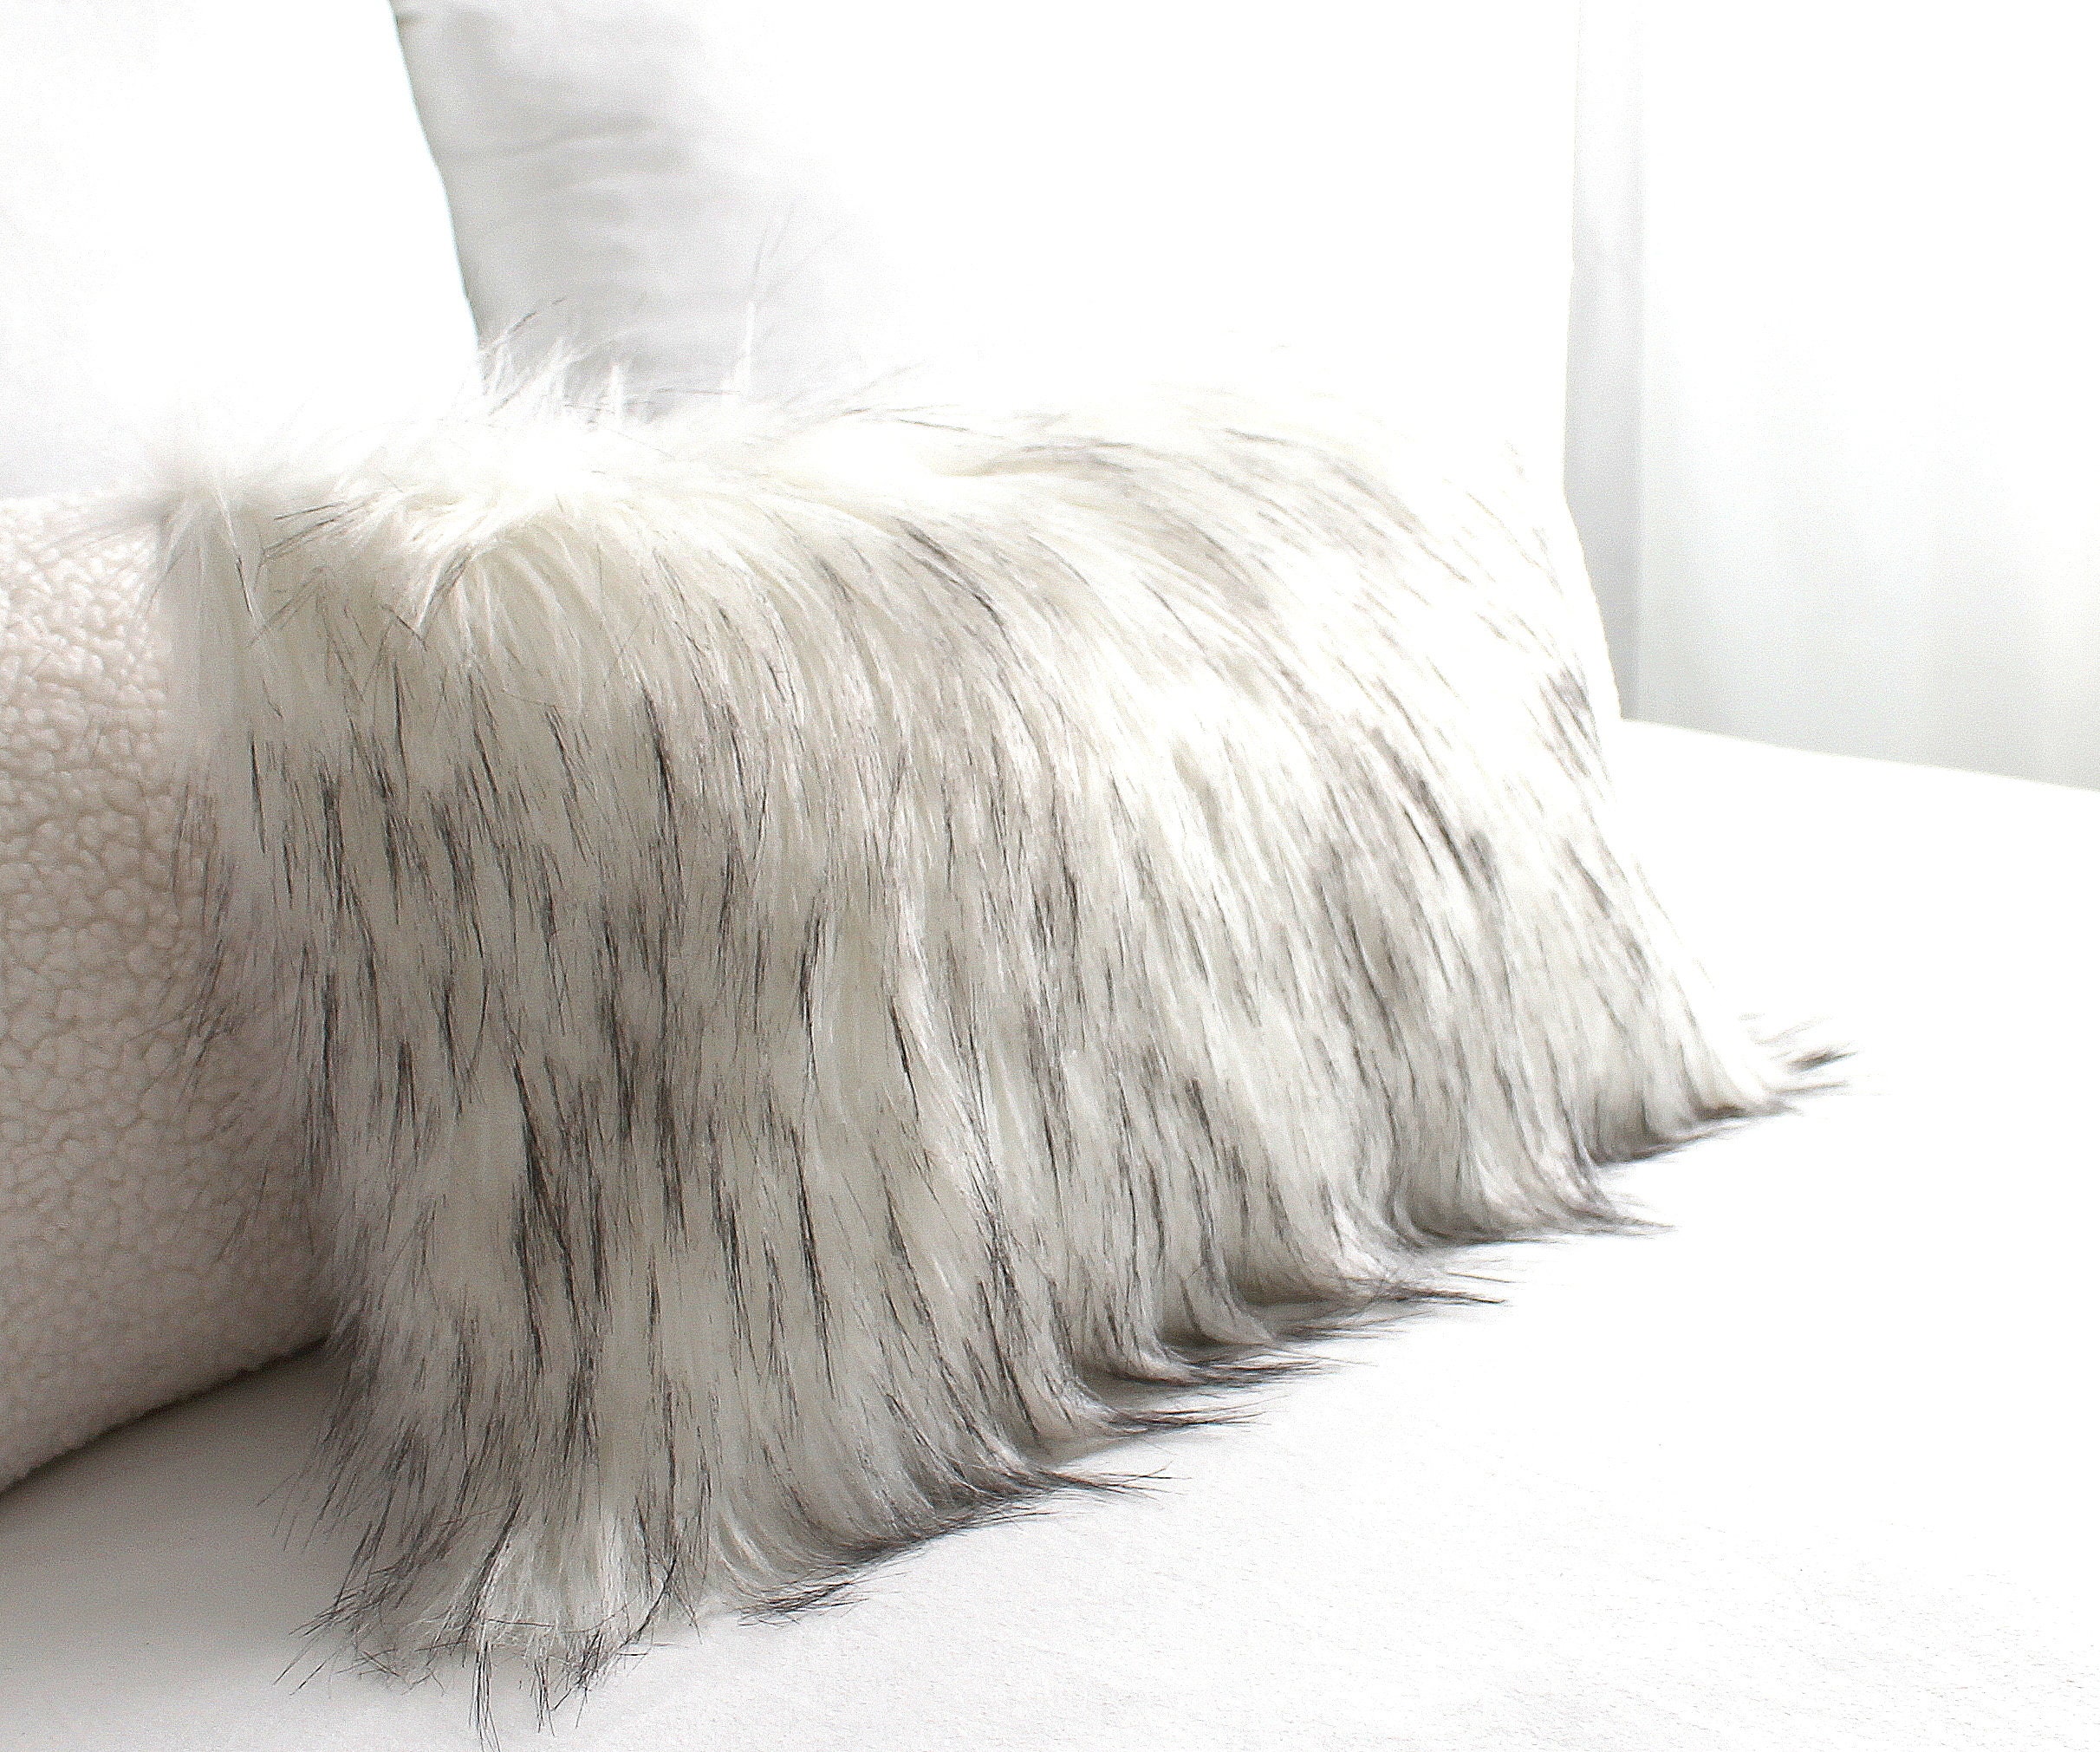 Large Bed White Furry Blanket Pillows Upholstered Panel Headboard Colorful  Stock Photo by ©anastasiagorova.gmail.com 314558246